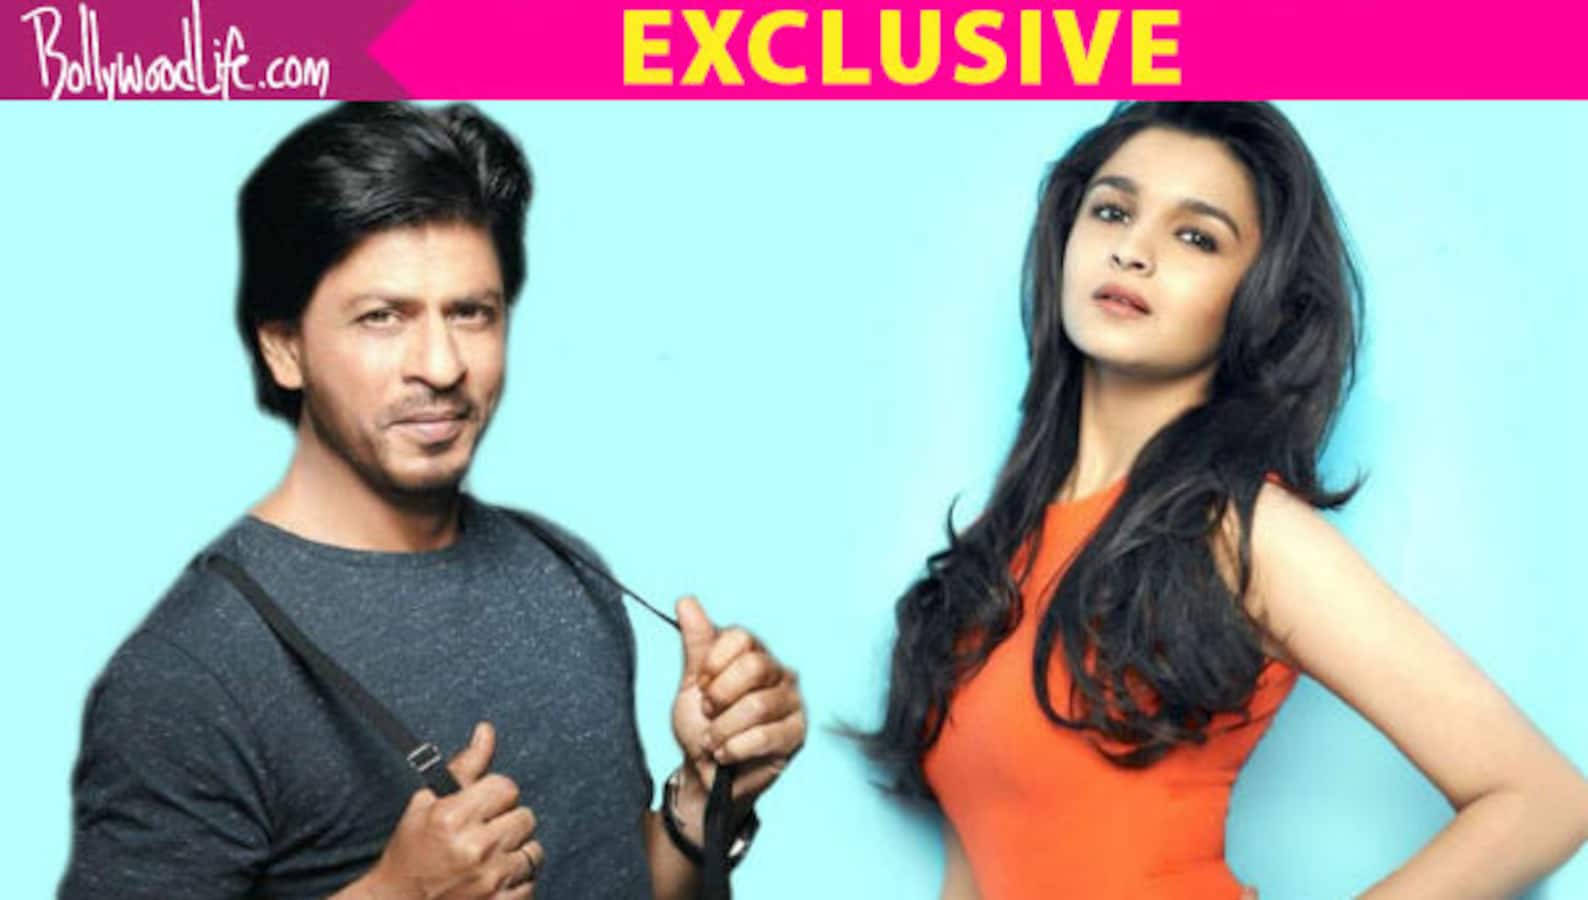 Fawad Khan OUT! Shah Rukh Khan and Alia Bhatt to be the first guests on Koffee With Karan 6!